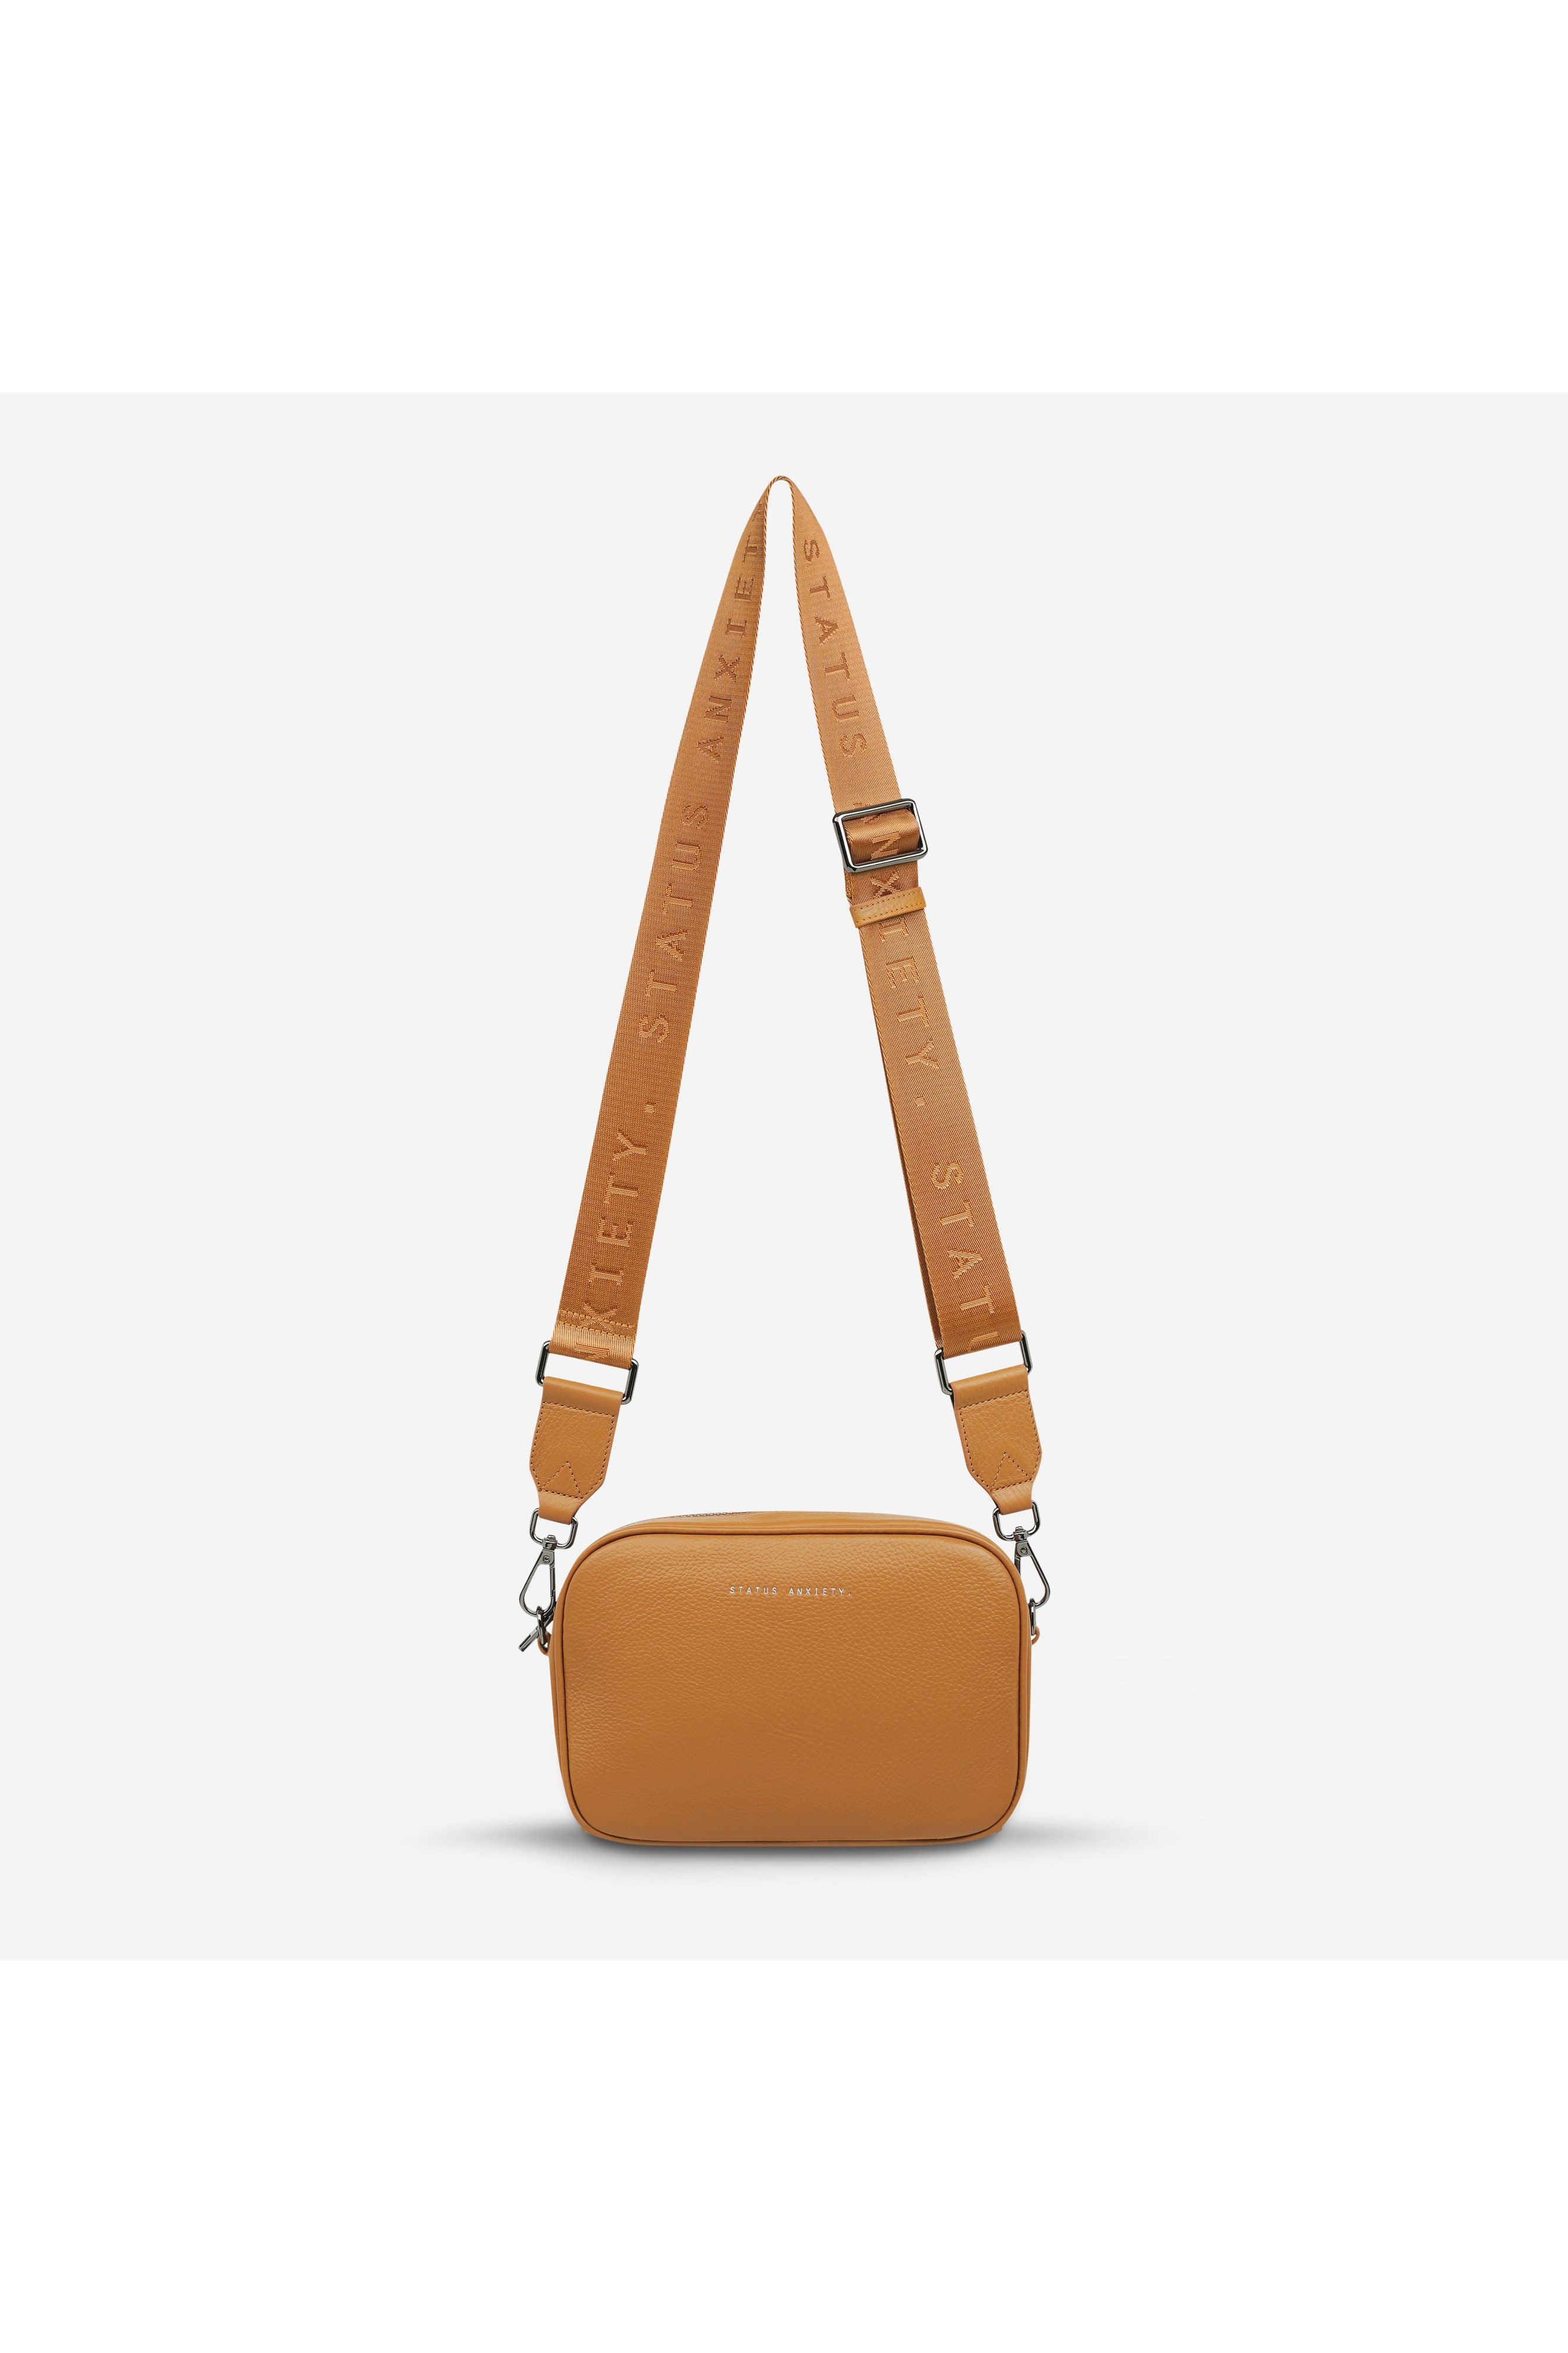 Status Anxiety - Plunder with Web Strap - Tan